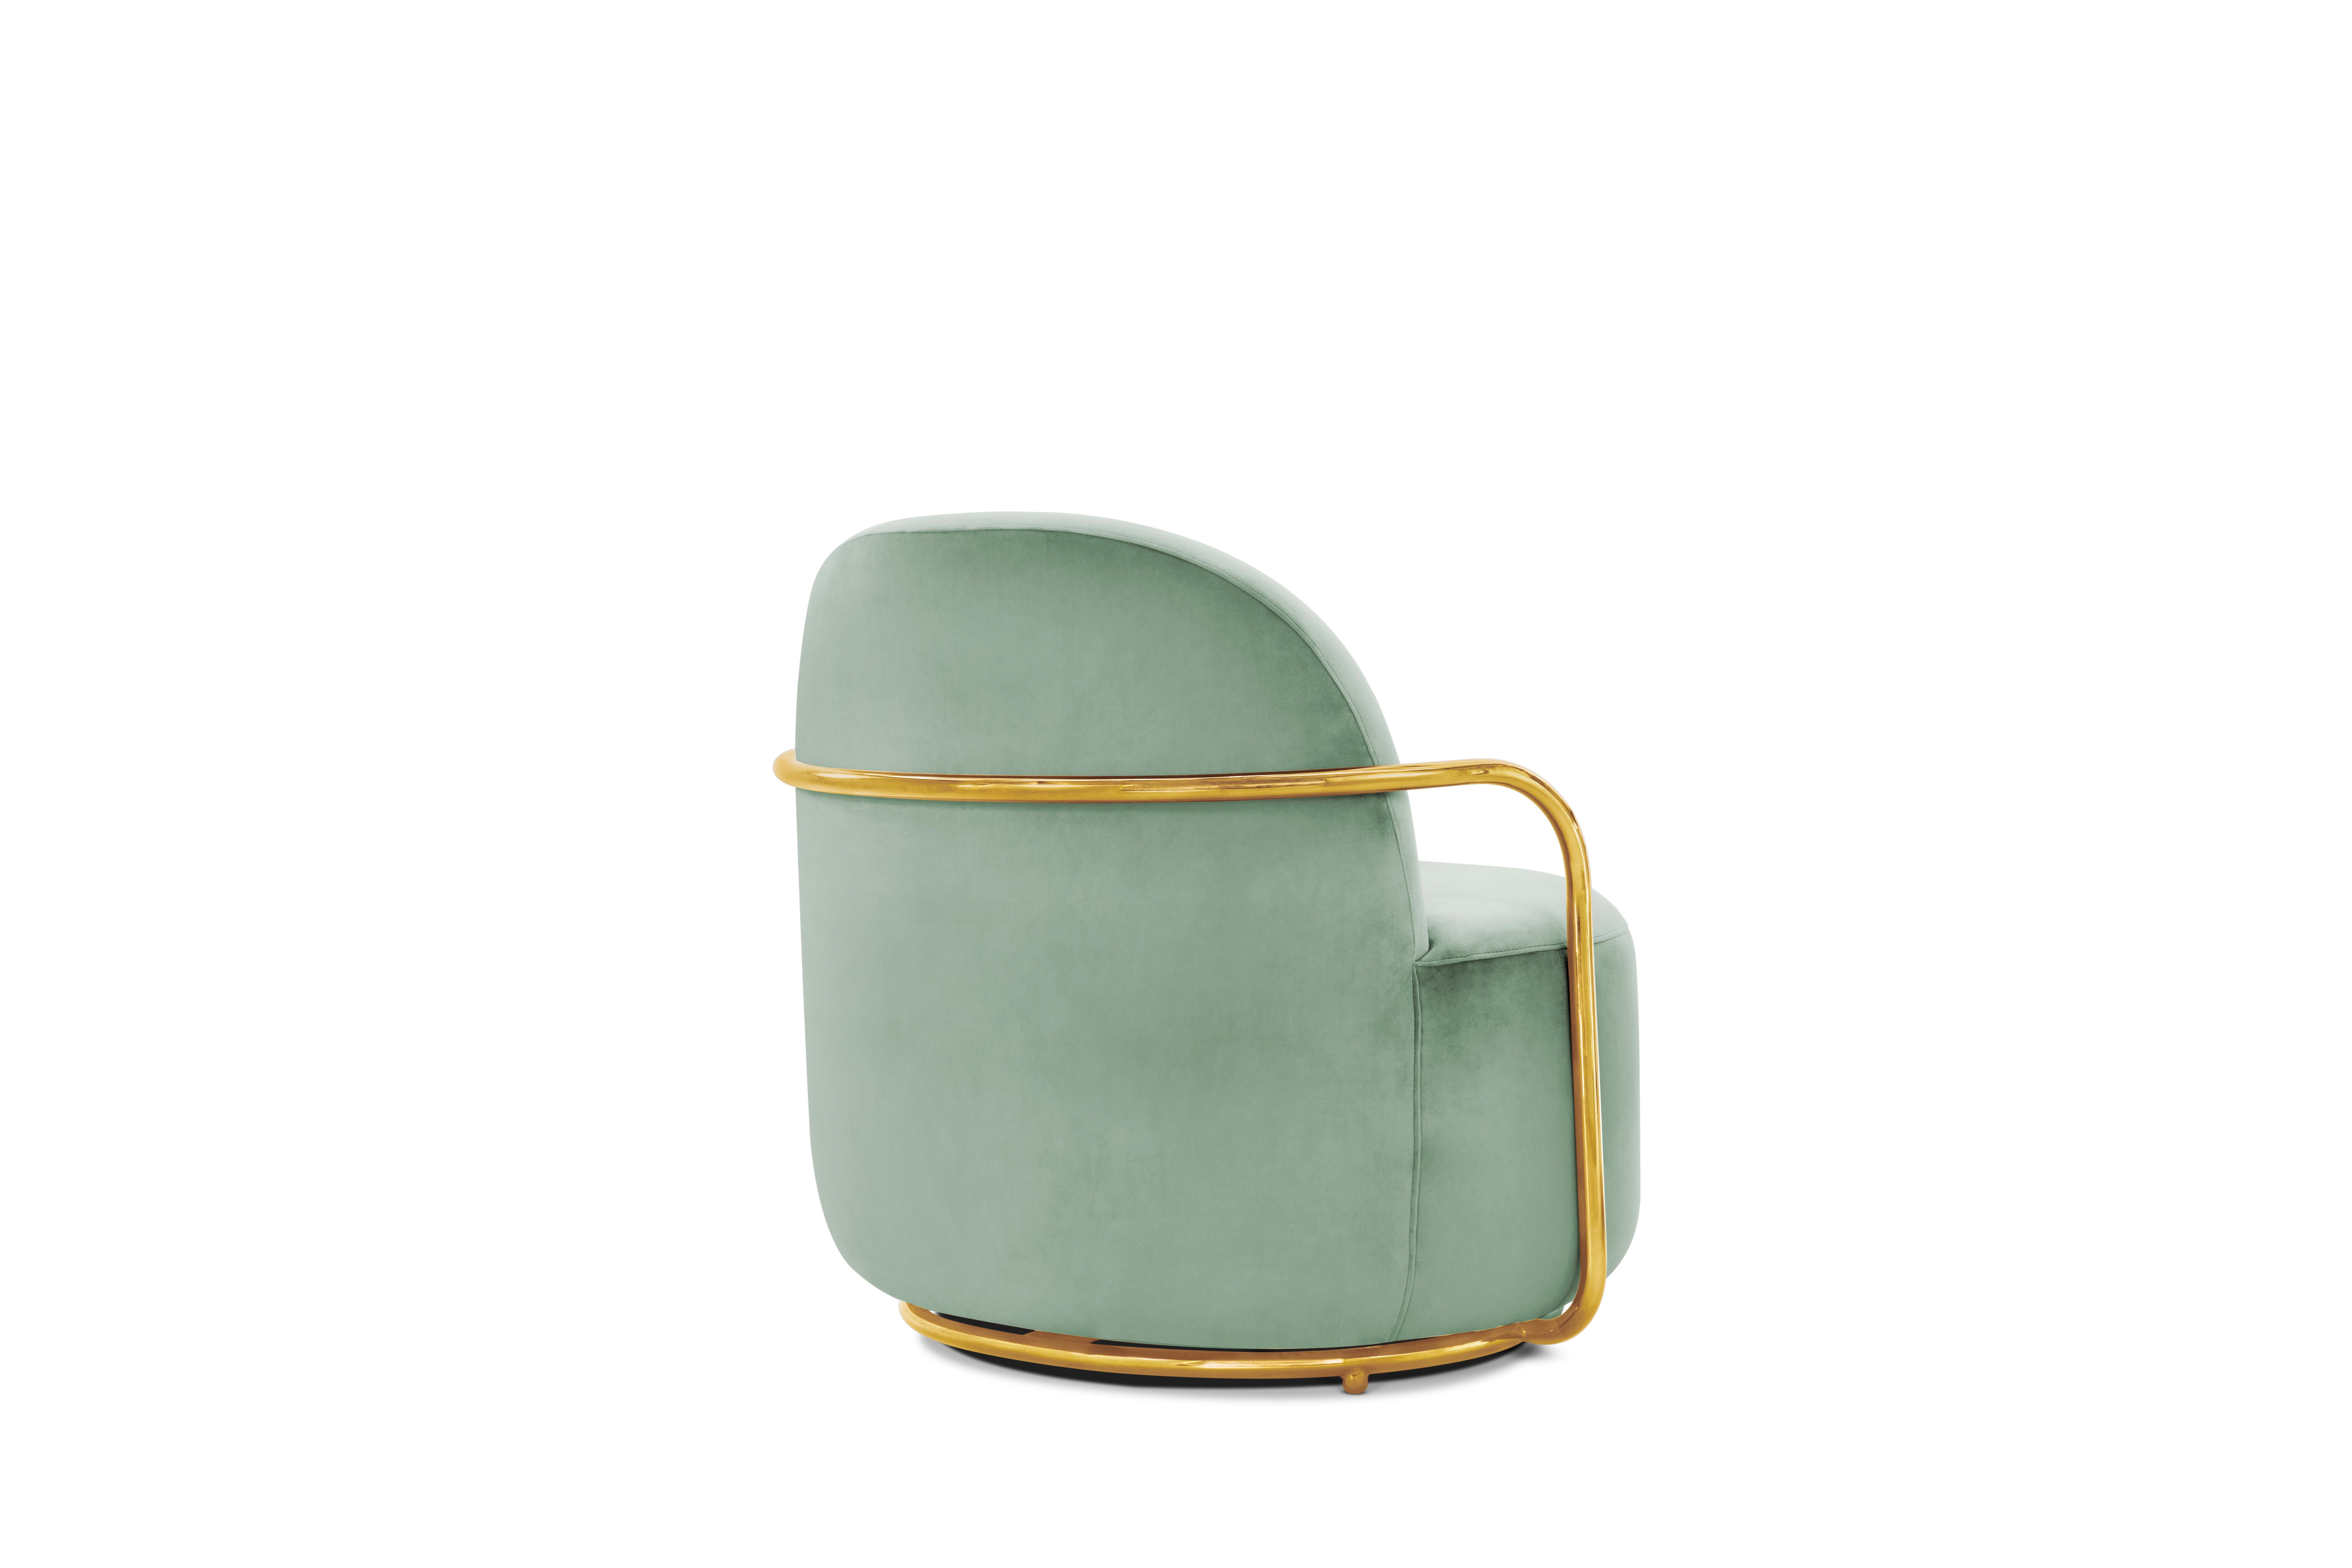 The comfort of Orion Lounge Chair with Plush Mint Green Velvet and Gold Arms by Nika Zupanccompliments the cool mint green velvet and gold metal arms.

Nika Zupanc, a strikingly renowned Slovenian designer, never shies away from redefining the